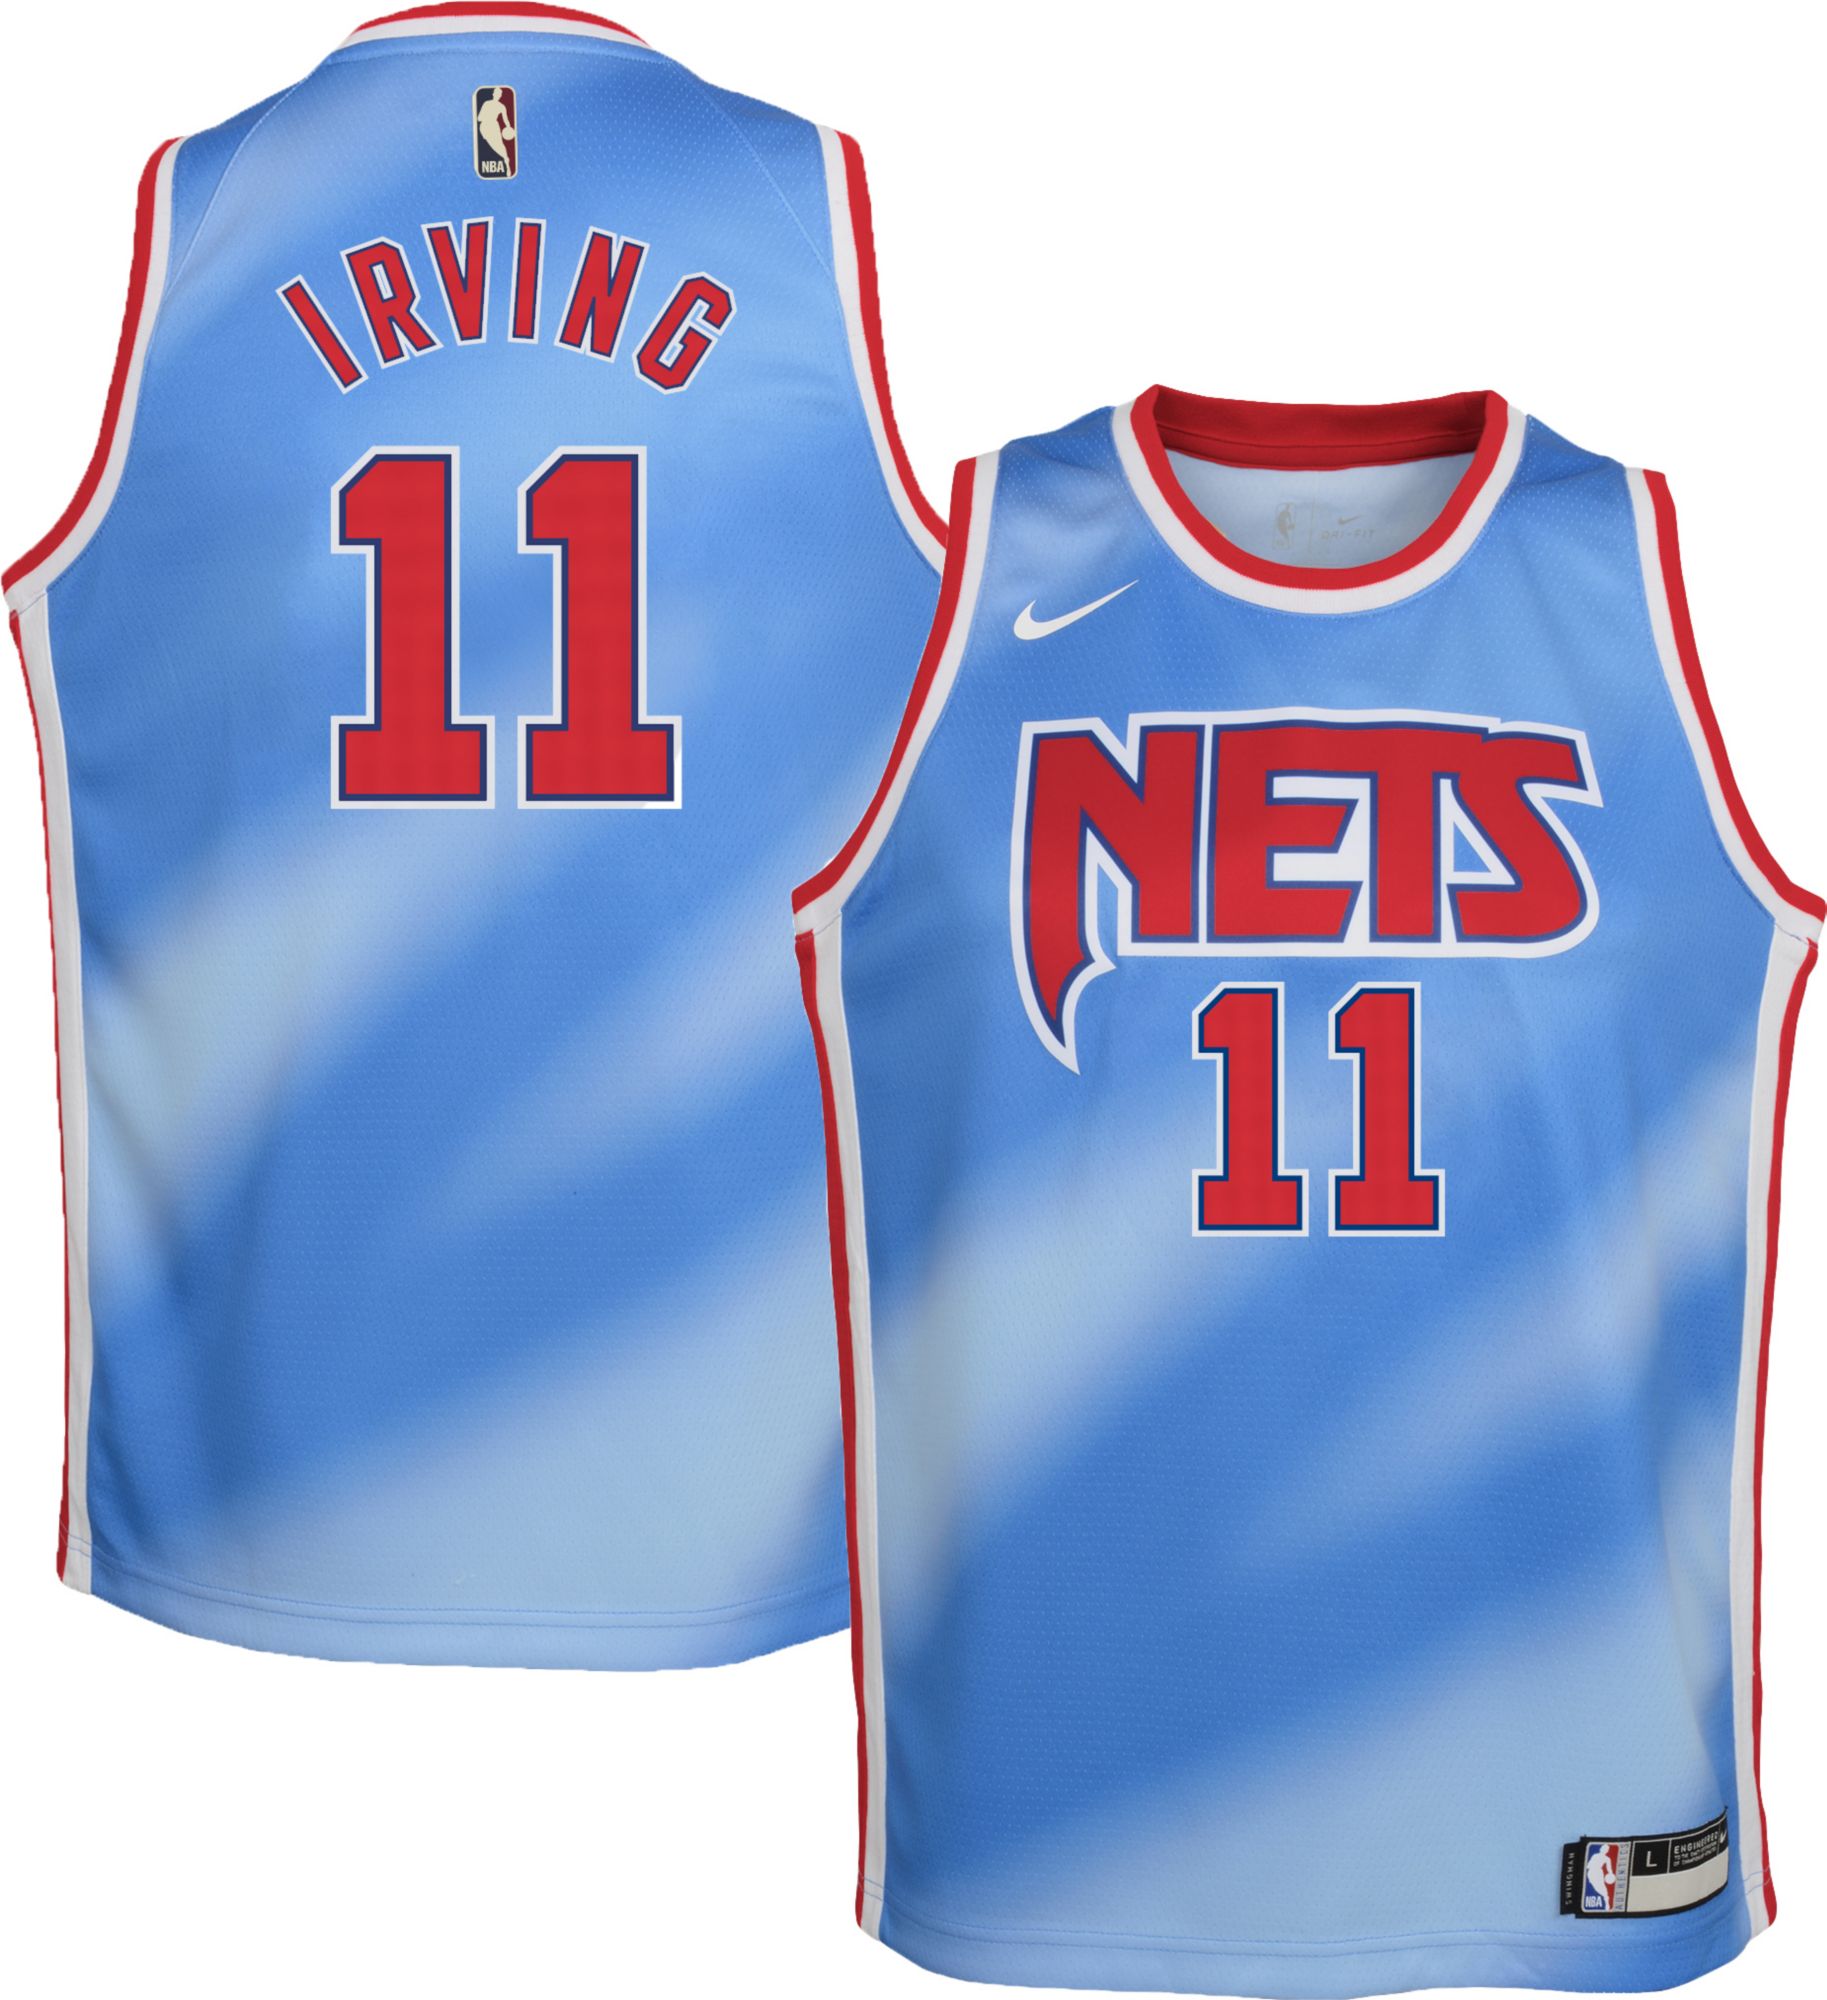 youth hardwood classic jersey